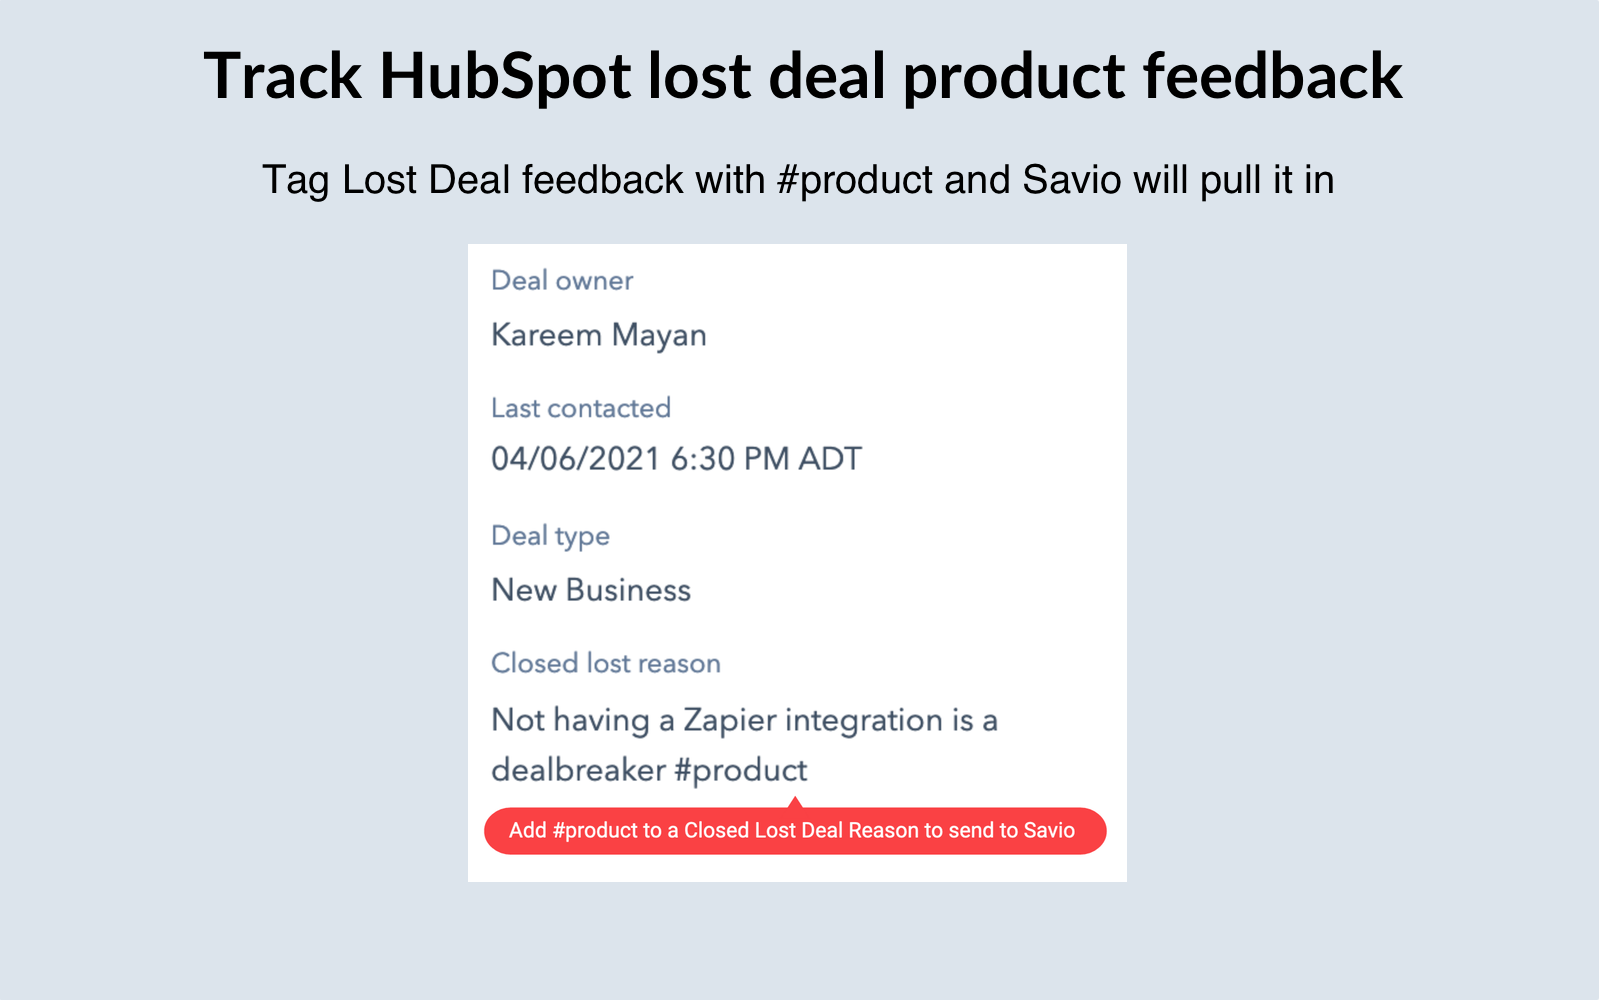 Track Feature requests in HubSpot